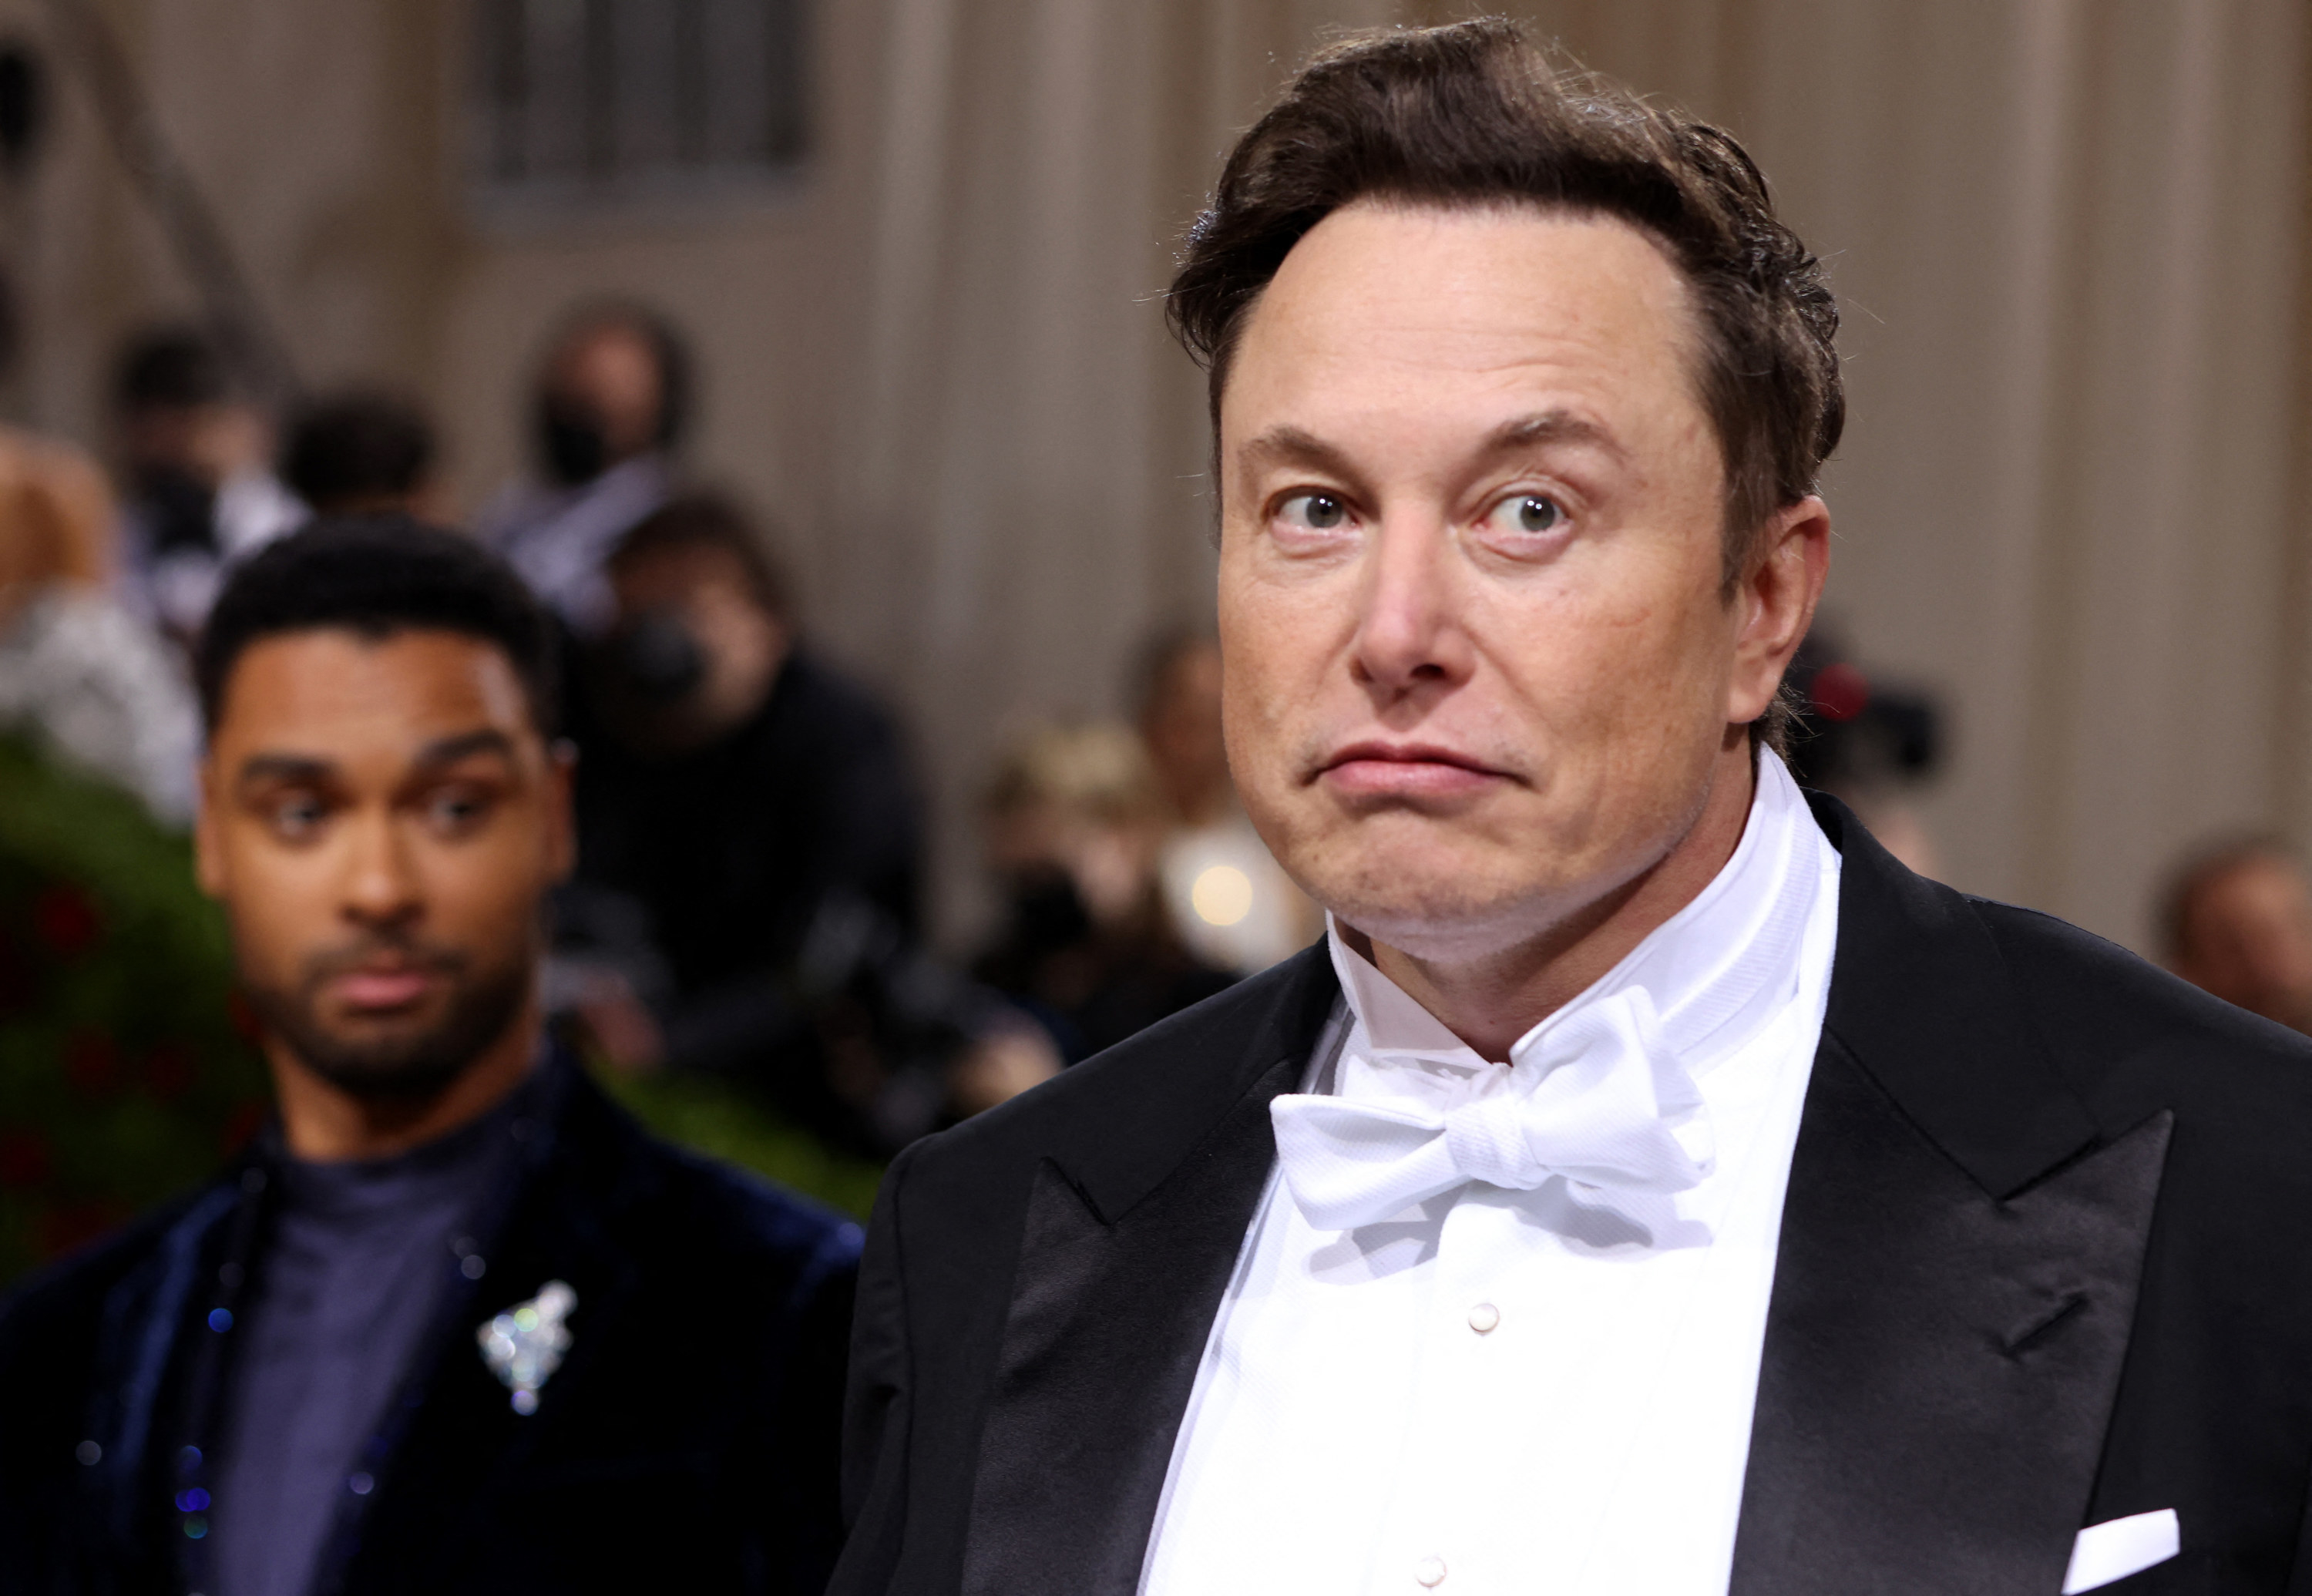 Elon Musk frowning while wearing a tuxedo